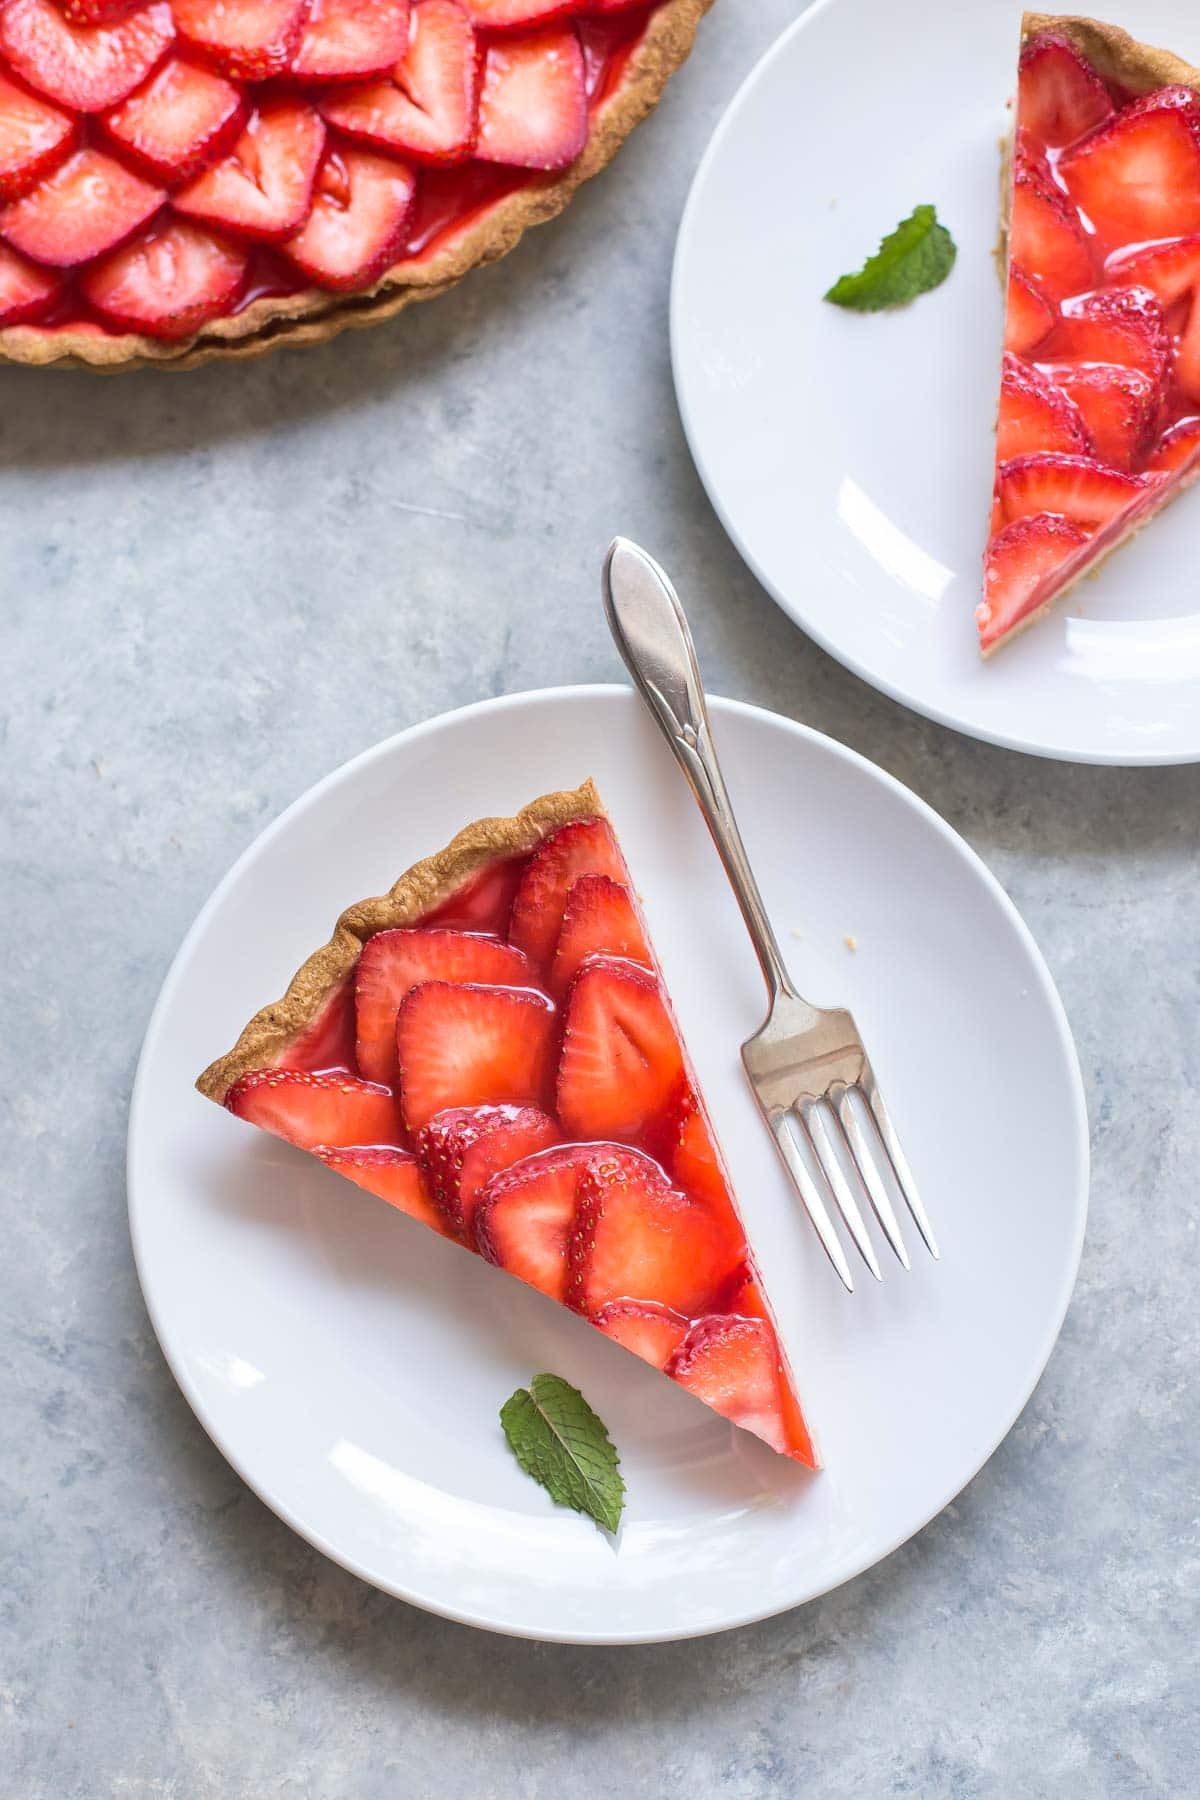 sliced strawberry tart on a dessert plate with a small mint leaf and fork, another serving and the rest of the tart in the background